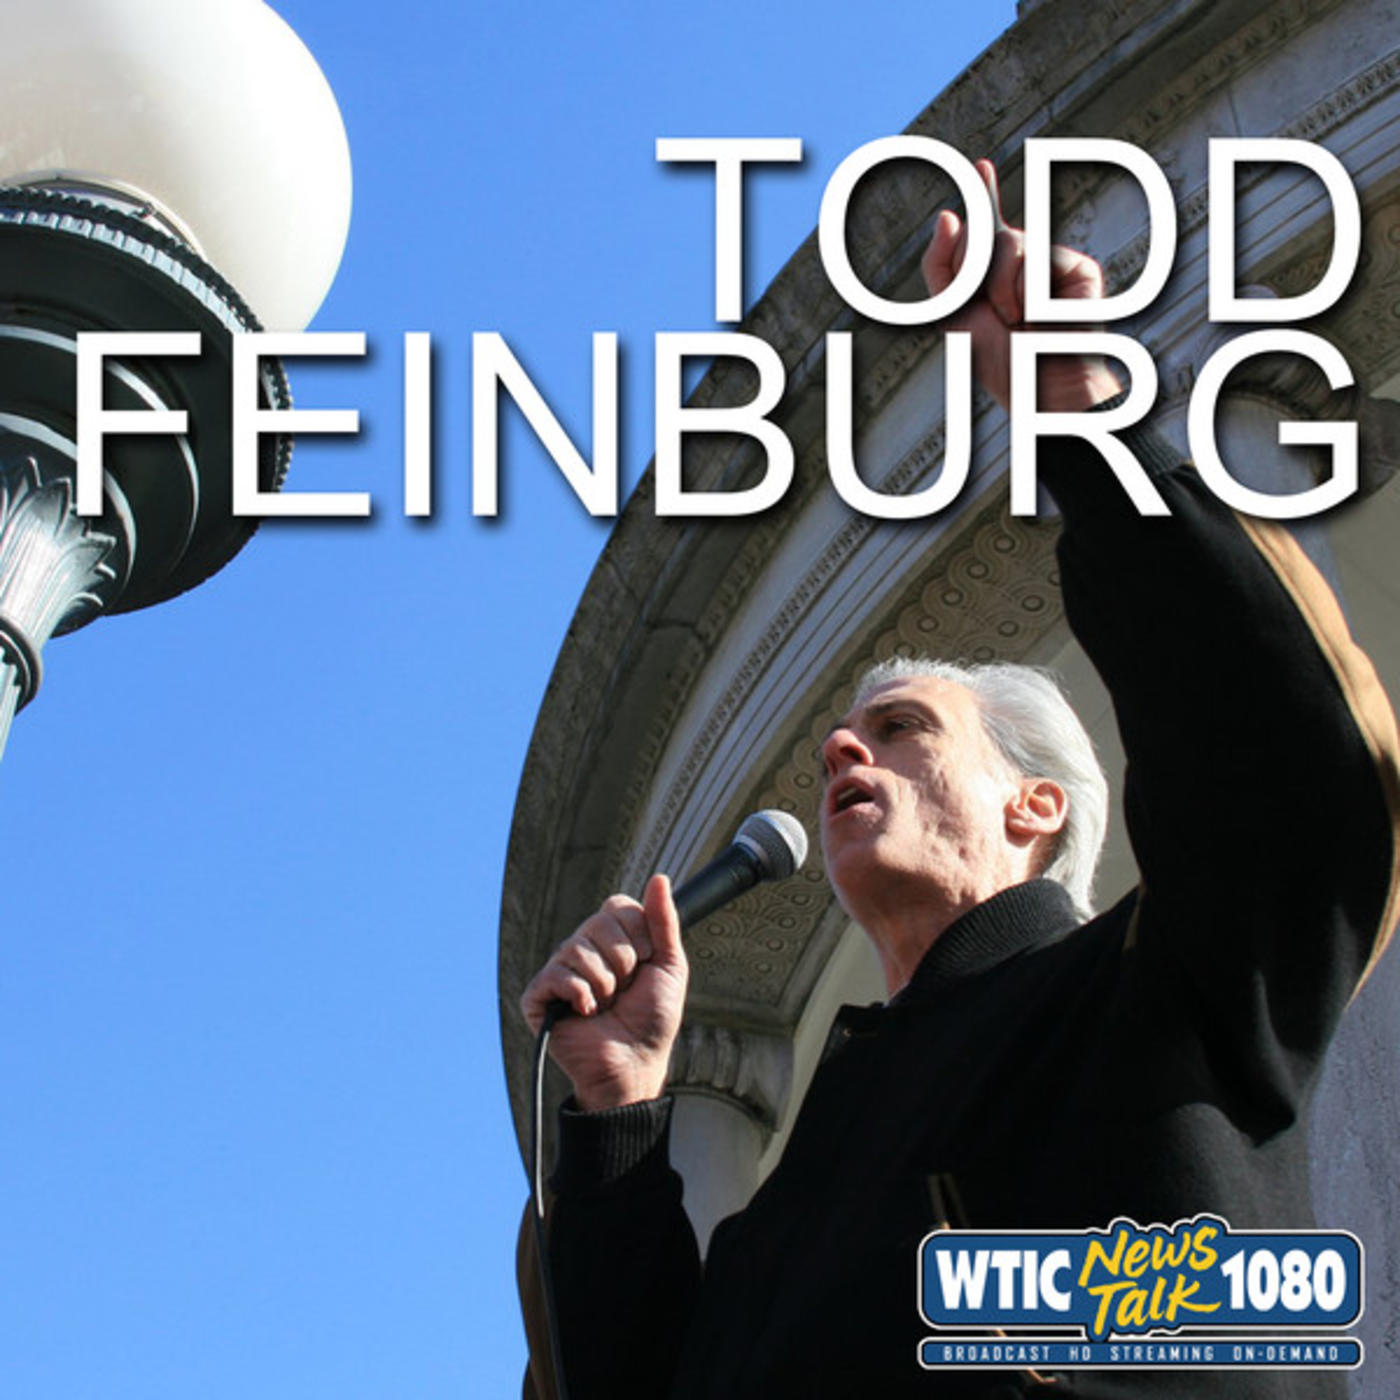 Todd Feinburg: The Authority of the President of the United States (04/14/20)